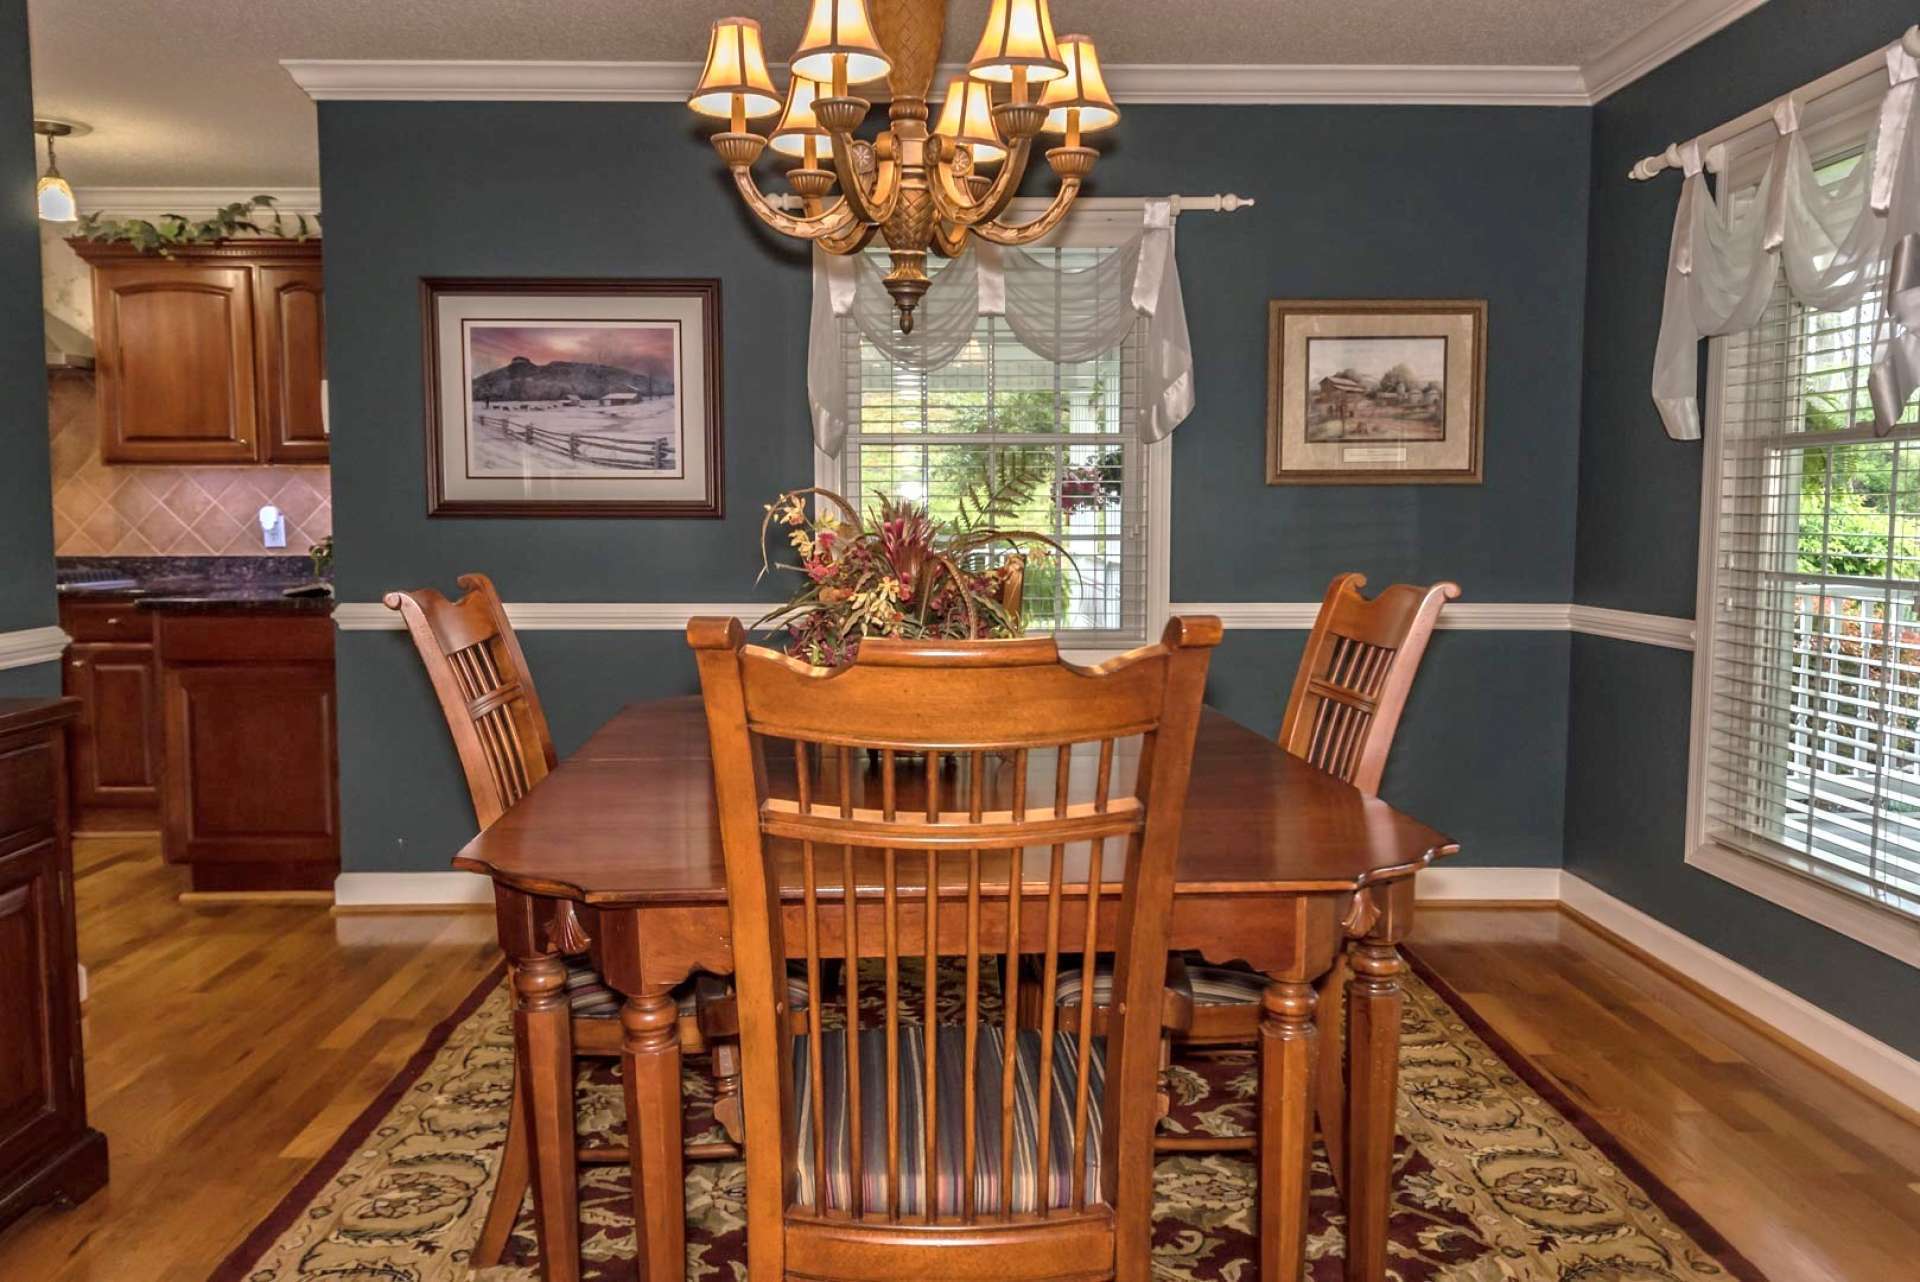 A formal dining area is perfect when entertaining friends and family.